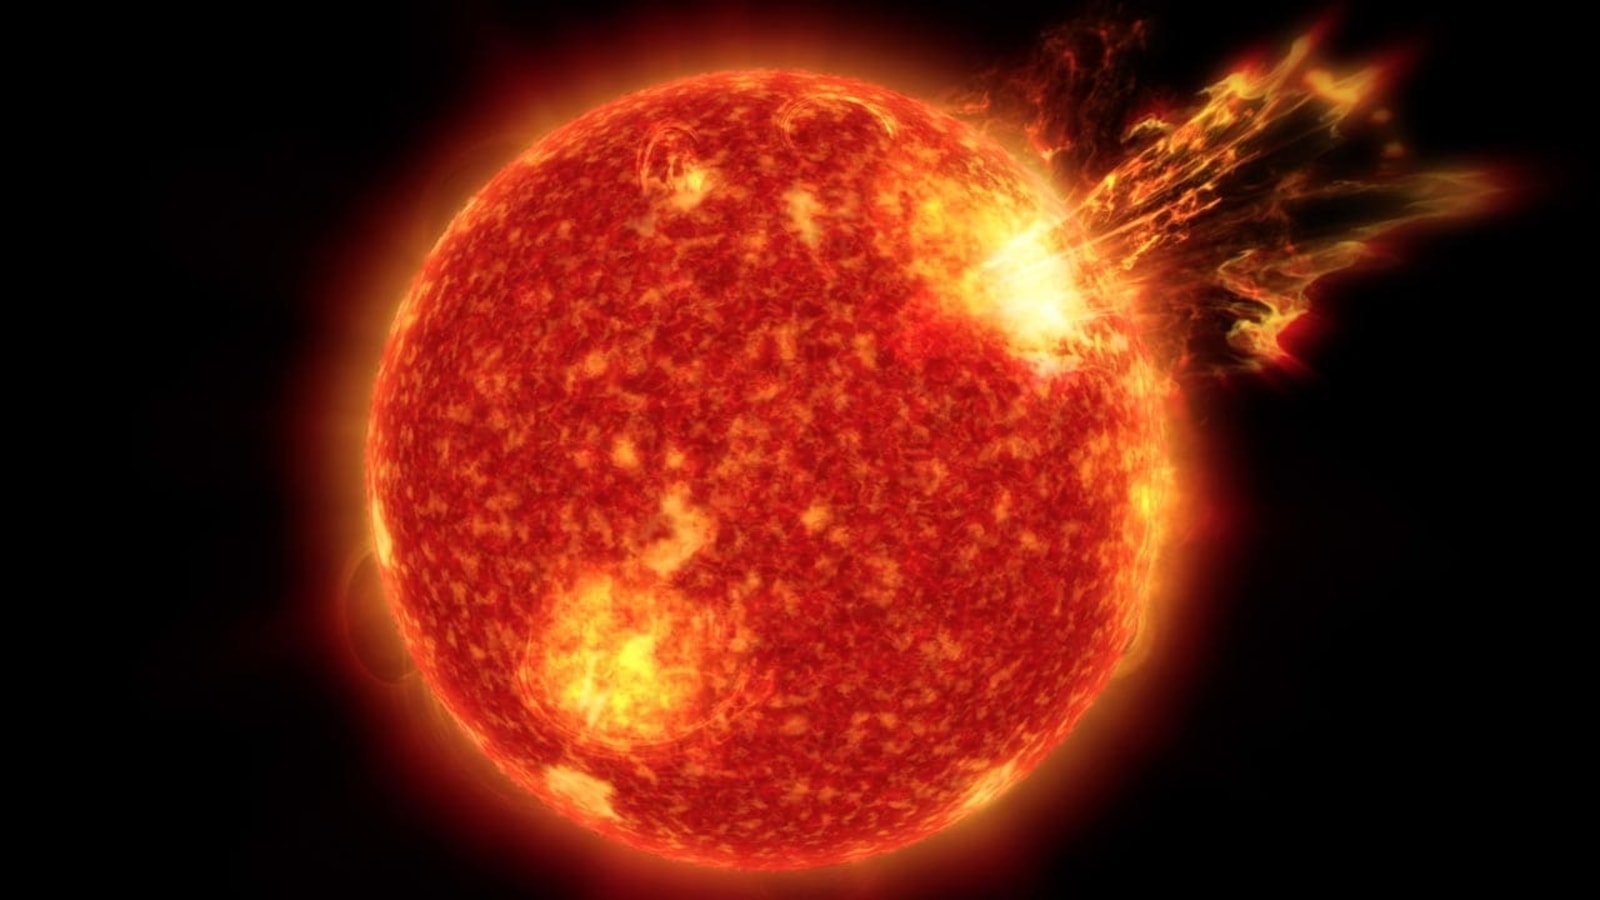 An unexpected solar storm just struck Earth at 372 miles a second - HT Tech